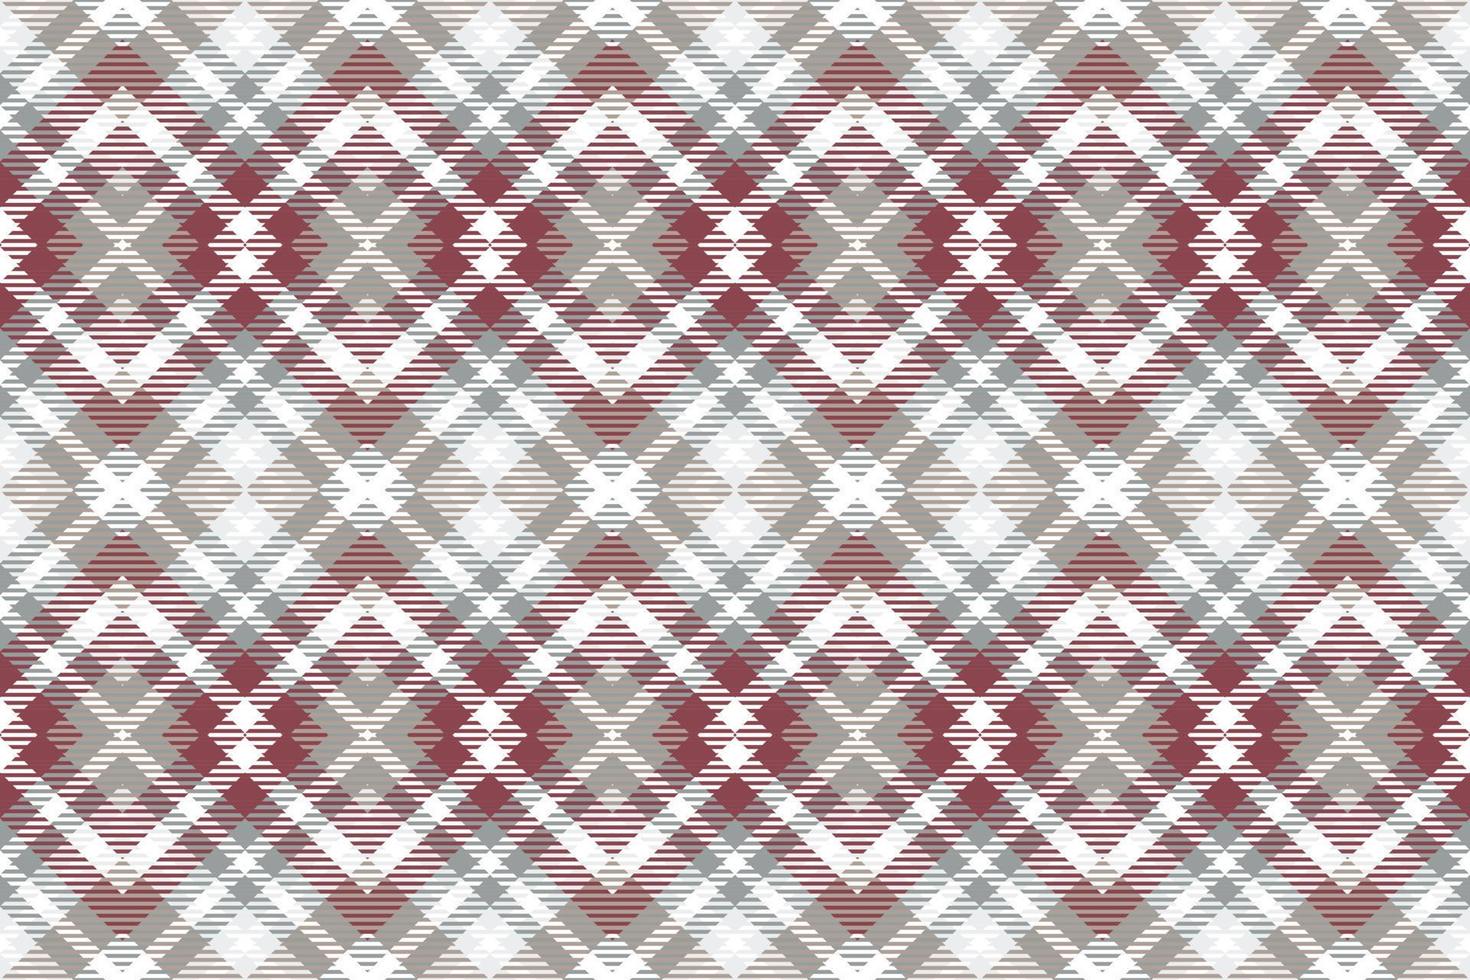 Simple plaid pattern is a patterned cloth consisting of criss crossed, horizontal and vertical bands in multiple colours.plaid Seamless For scarf,pyjamas,blanket,duvet,kilt large shawl. vector